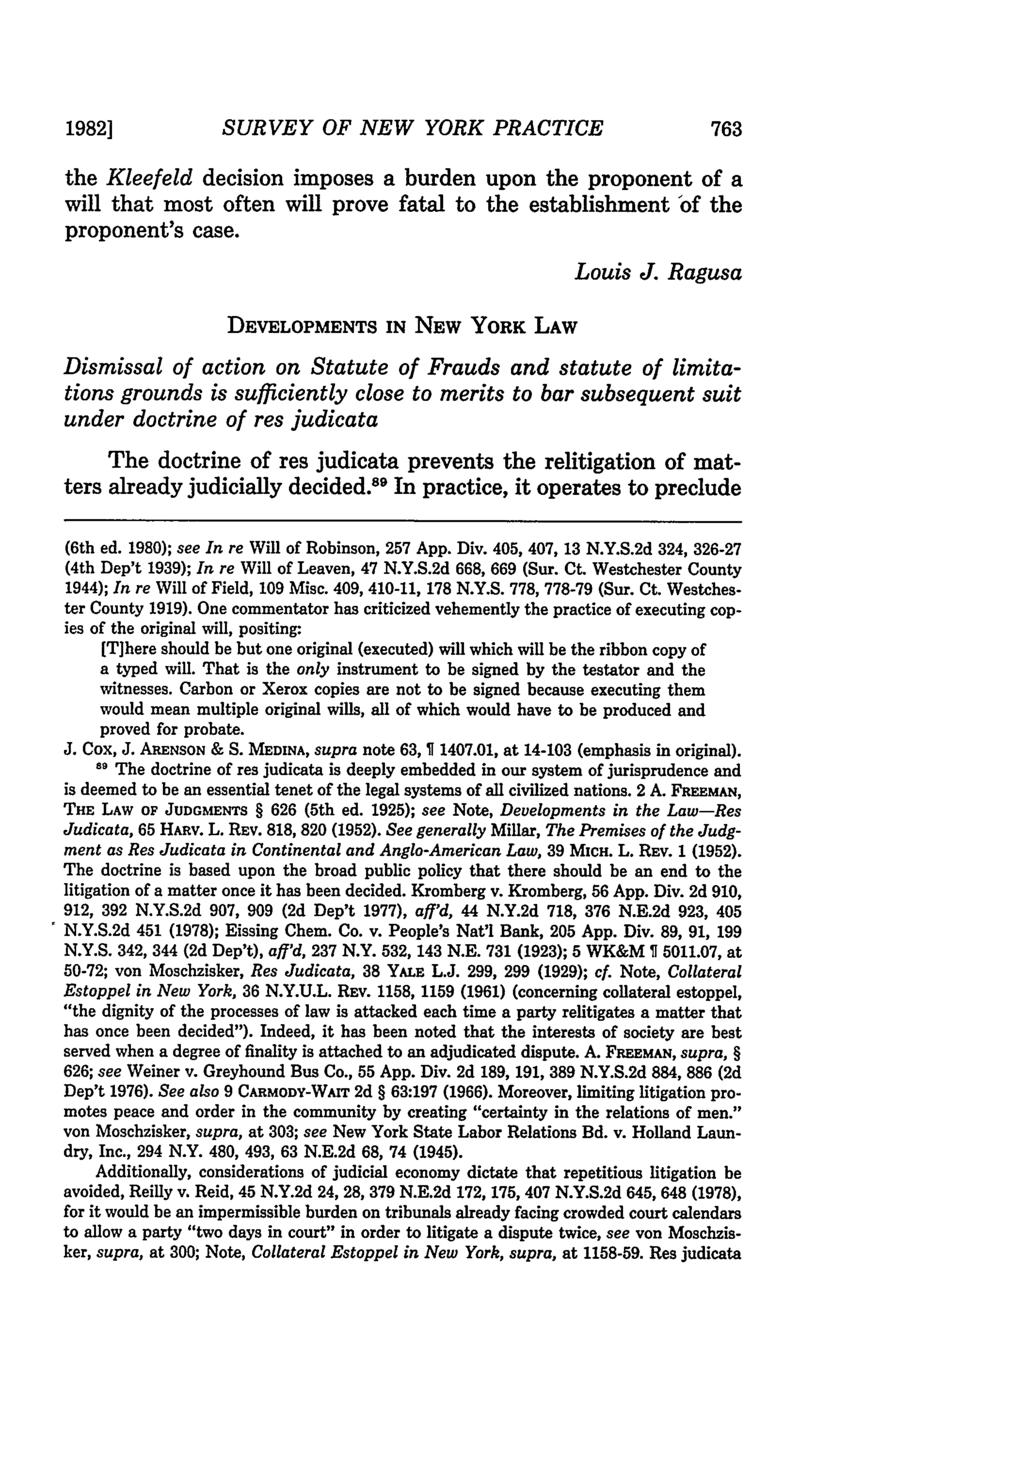 1982] SURVEY OF NEW YORK PRACTICE the Kleefeld decision imposes a burden upon the proponent of a will that most often will prove fatal to the establishment 'of the proponent's case. Louis J.